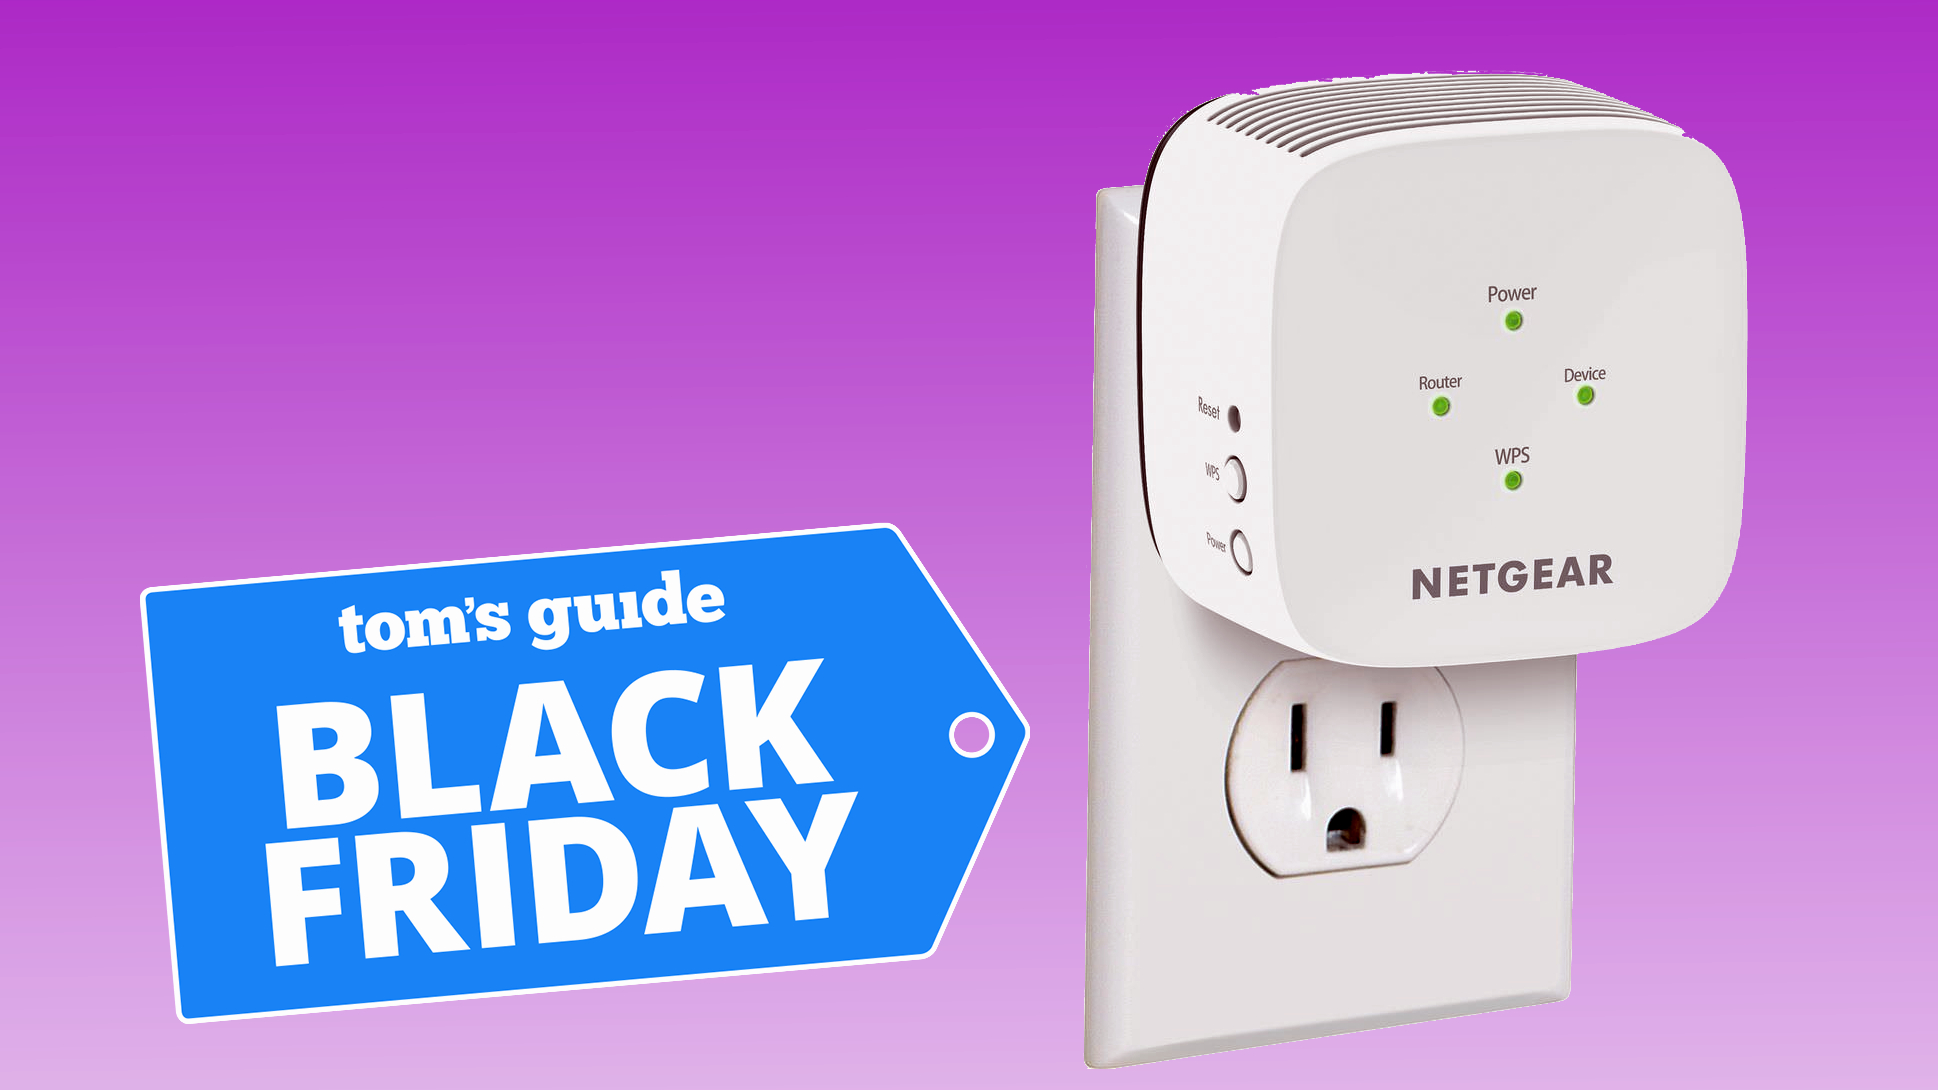 NETGEAR - EX6110 AC1200 WiFi Wall Plug Range Extender and Signal Booster on a purple background with black friday tag superimposed